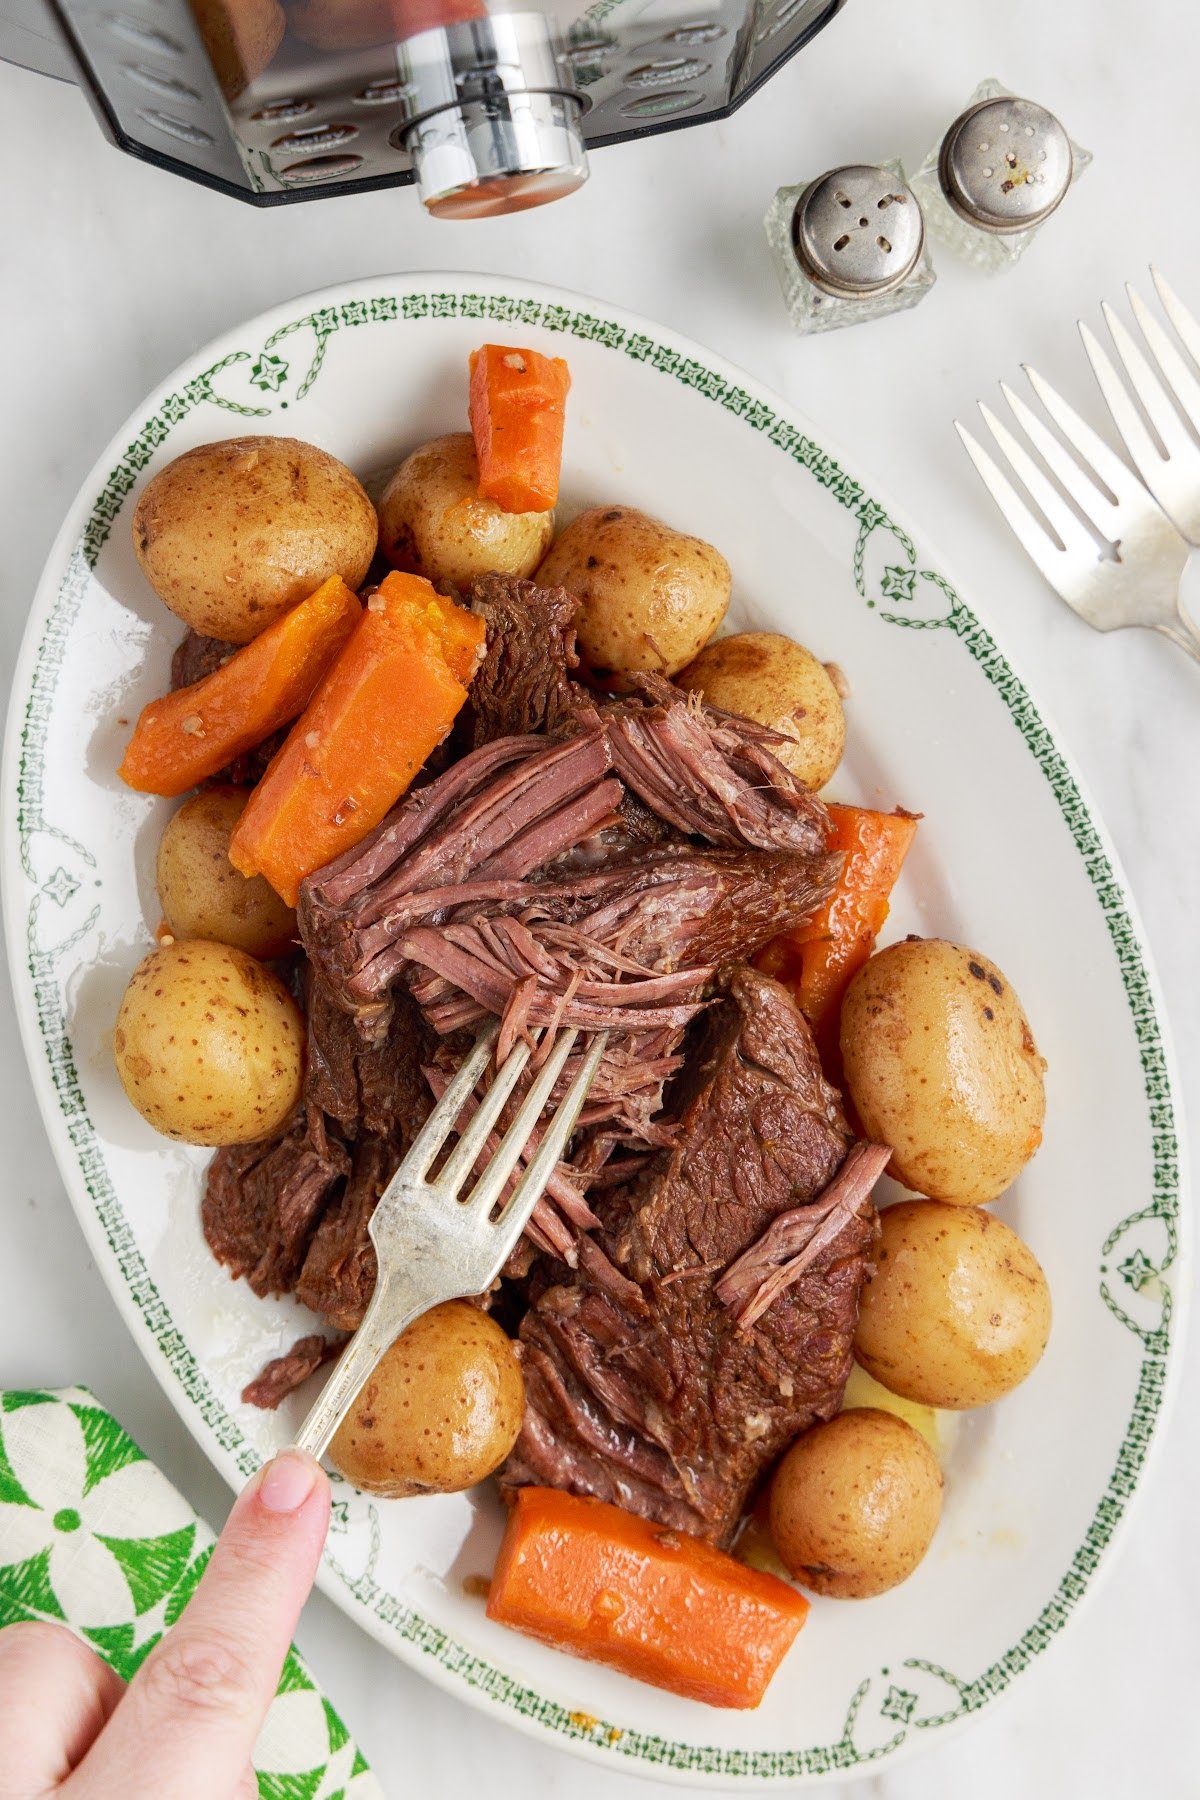 Shredded roast surrounded by potatoes and veggies, on a platter.